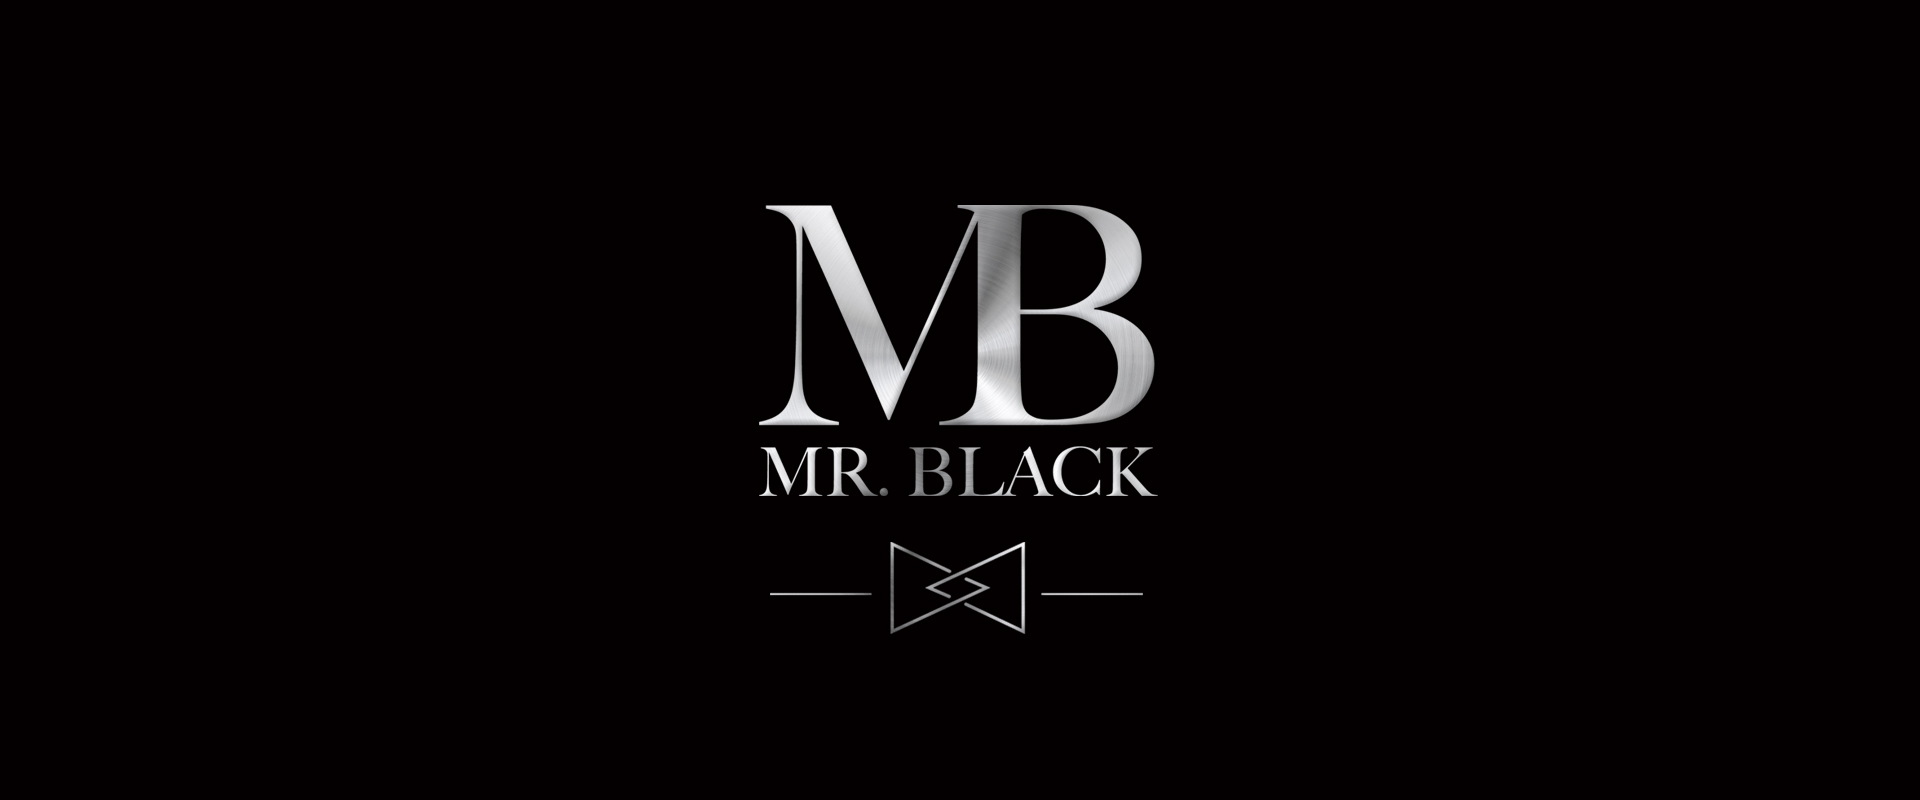 mrBlack Wallpaper from € per m² | miPic